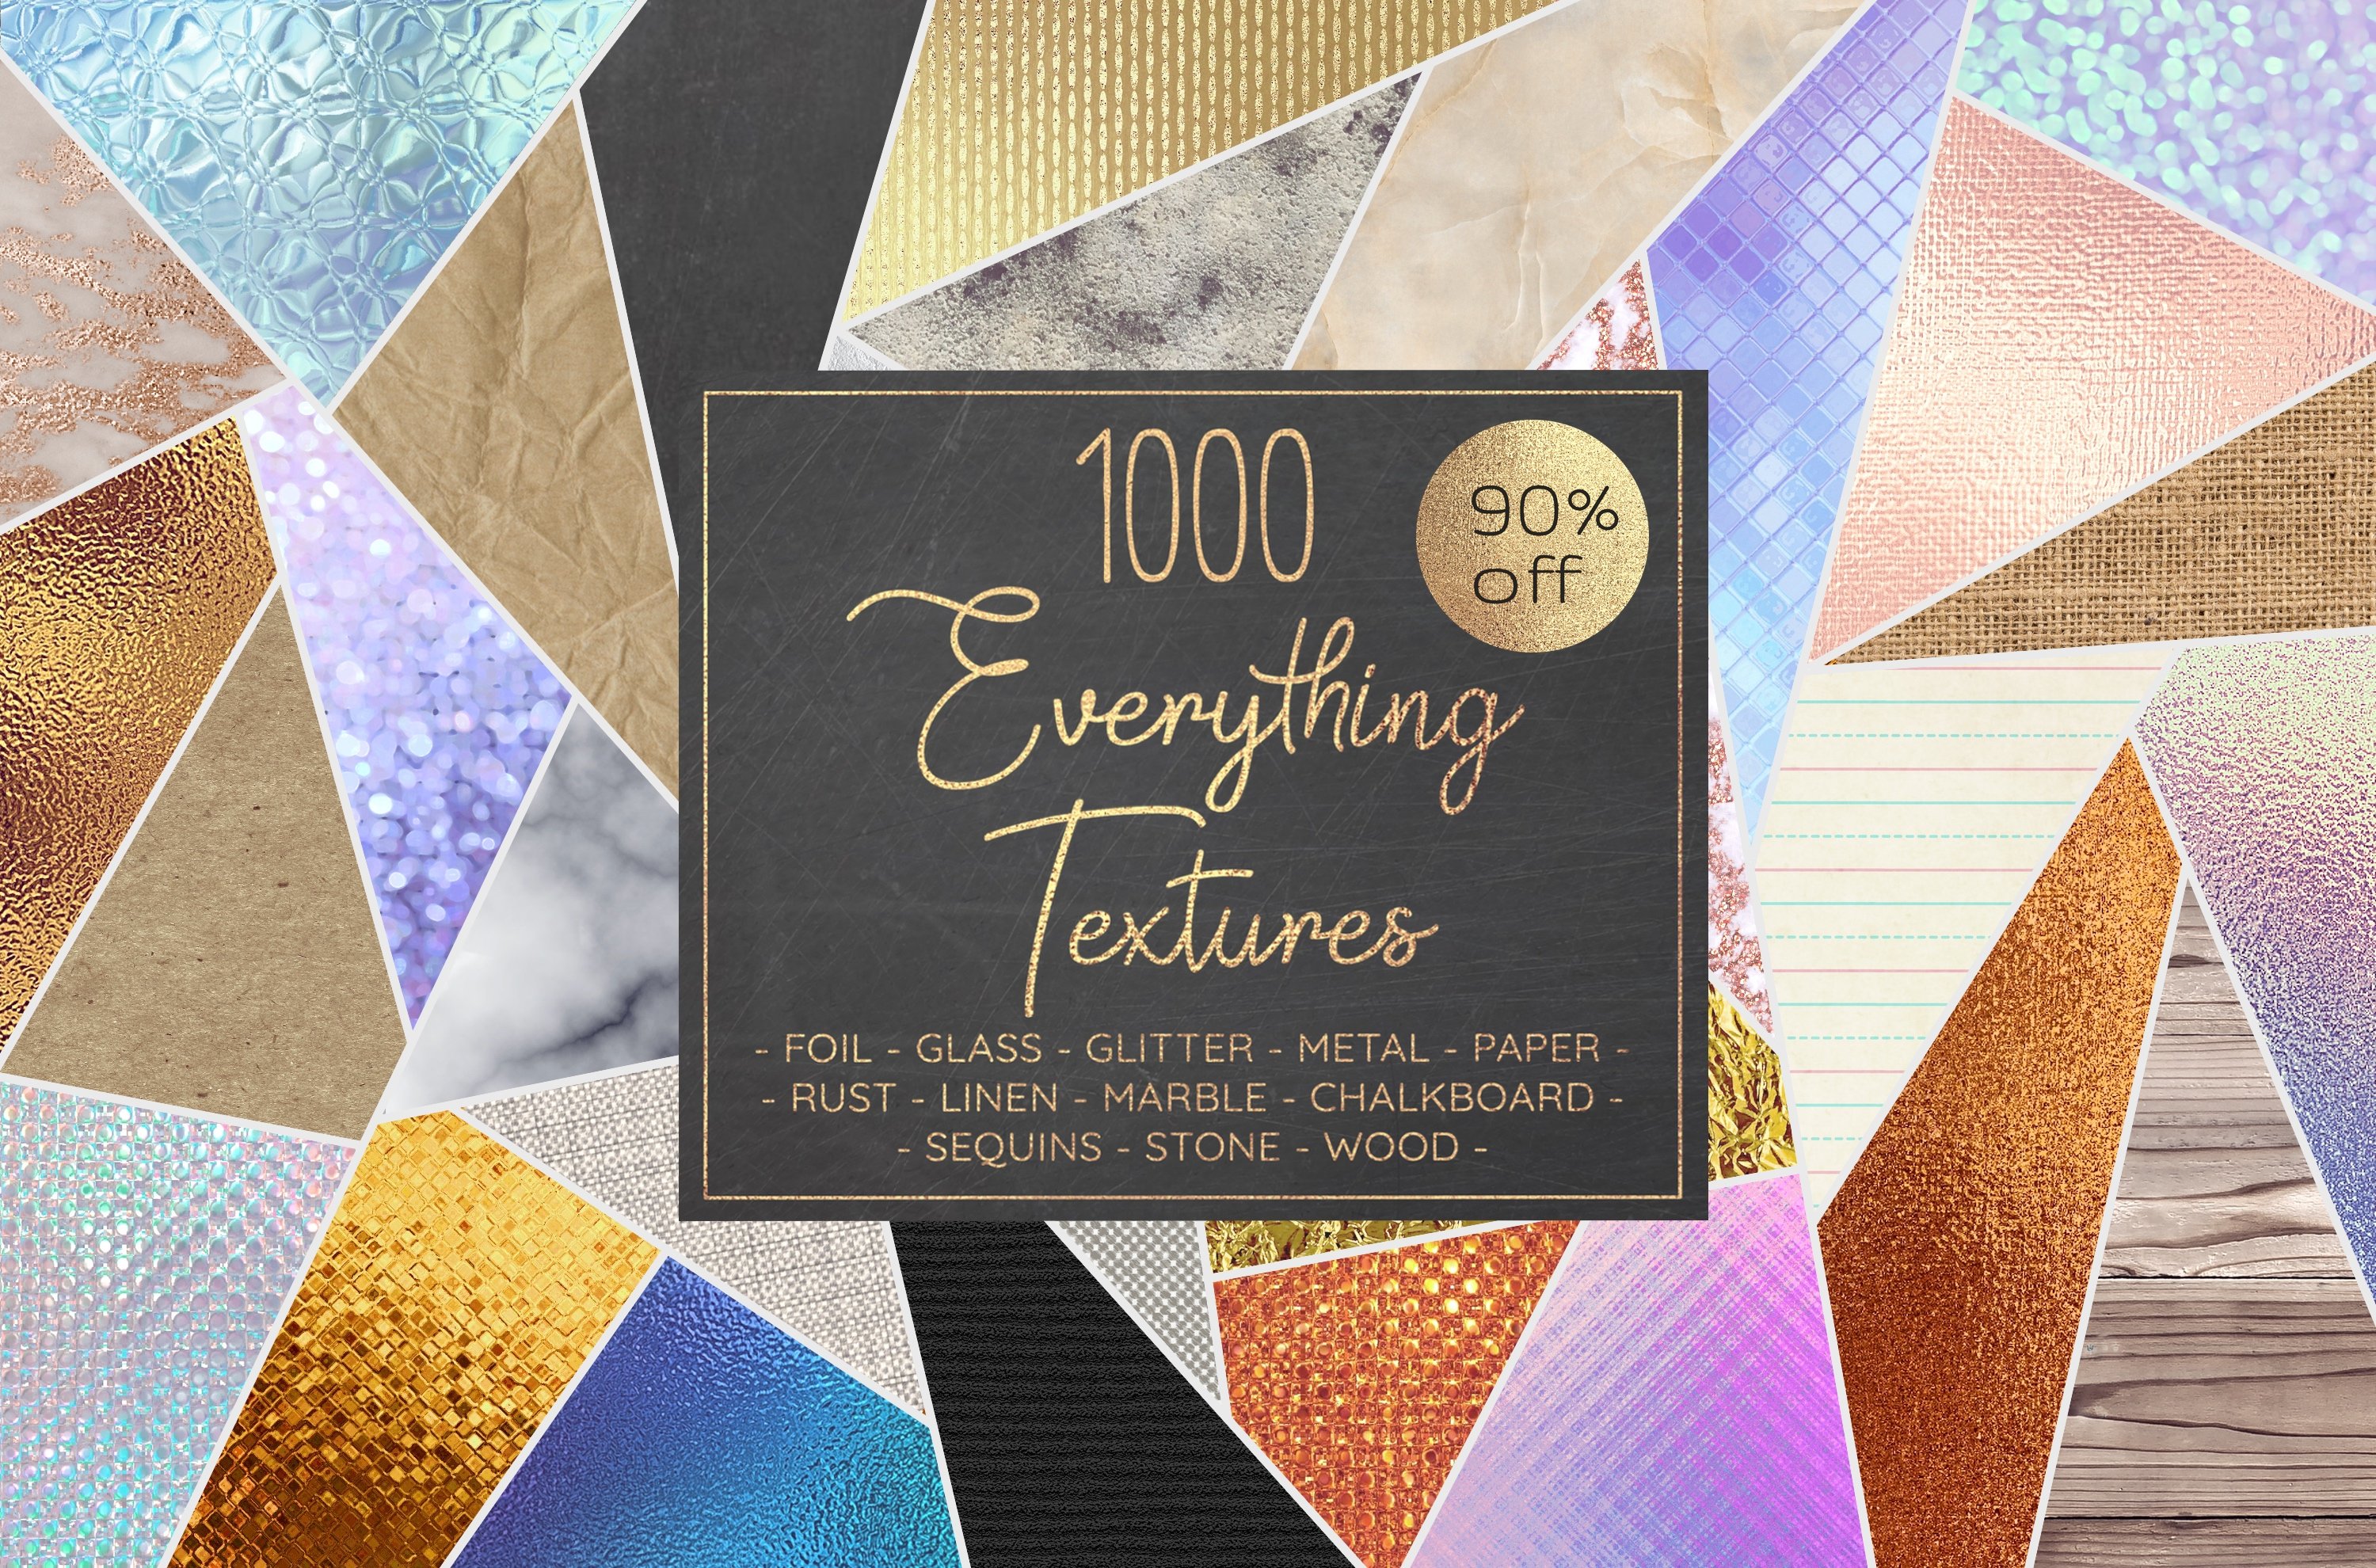 Everything Textures Bundle cover image.